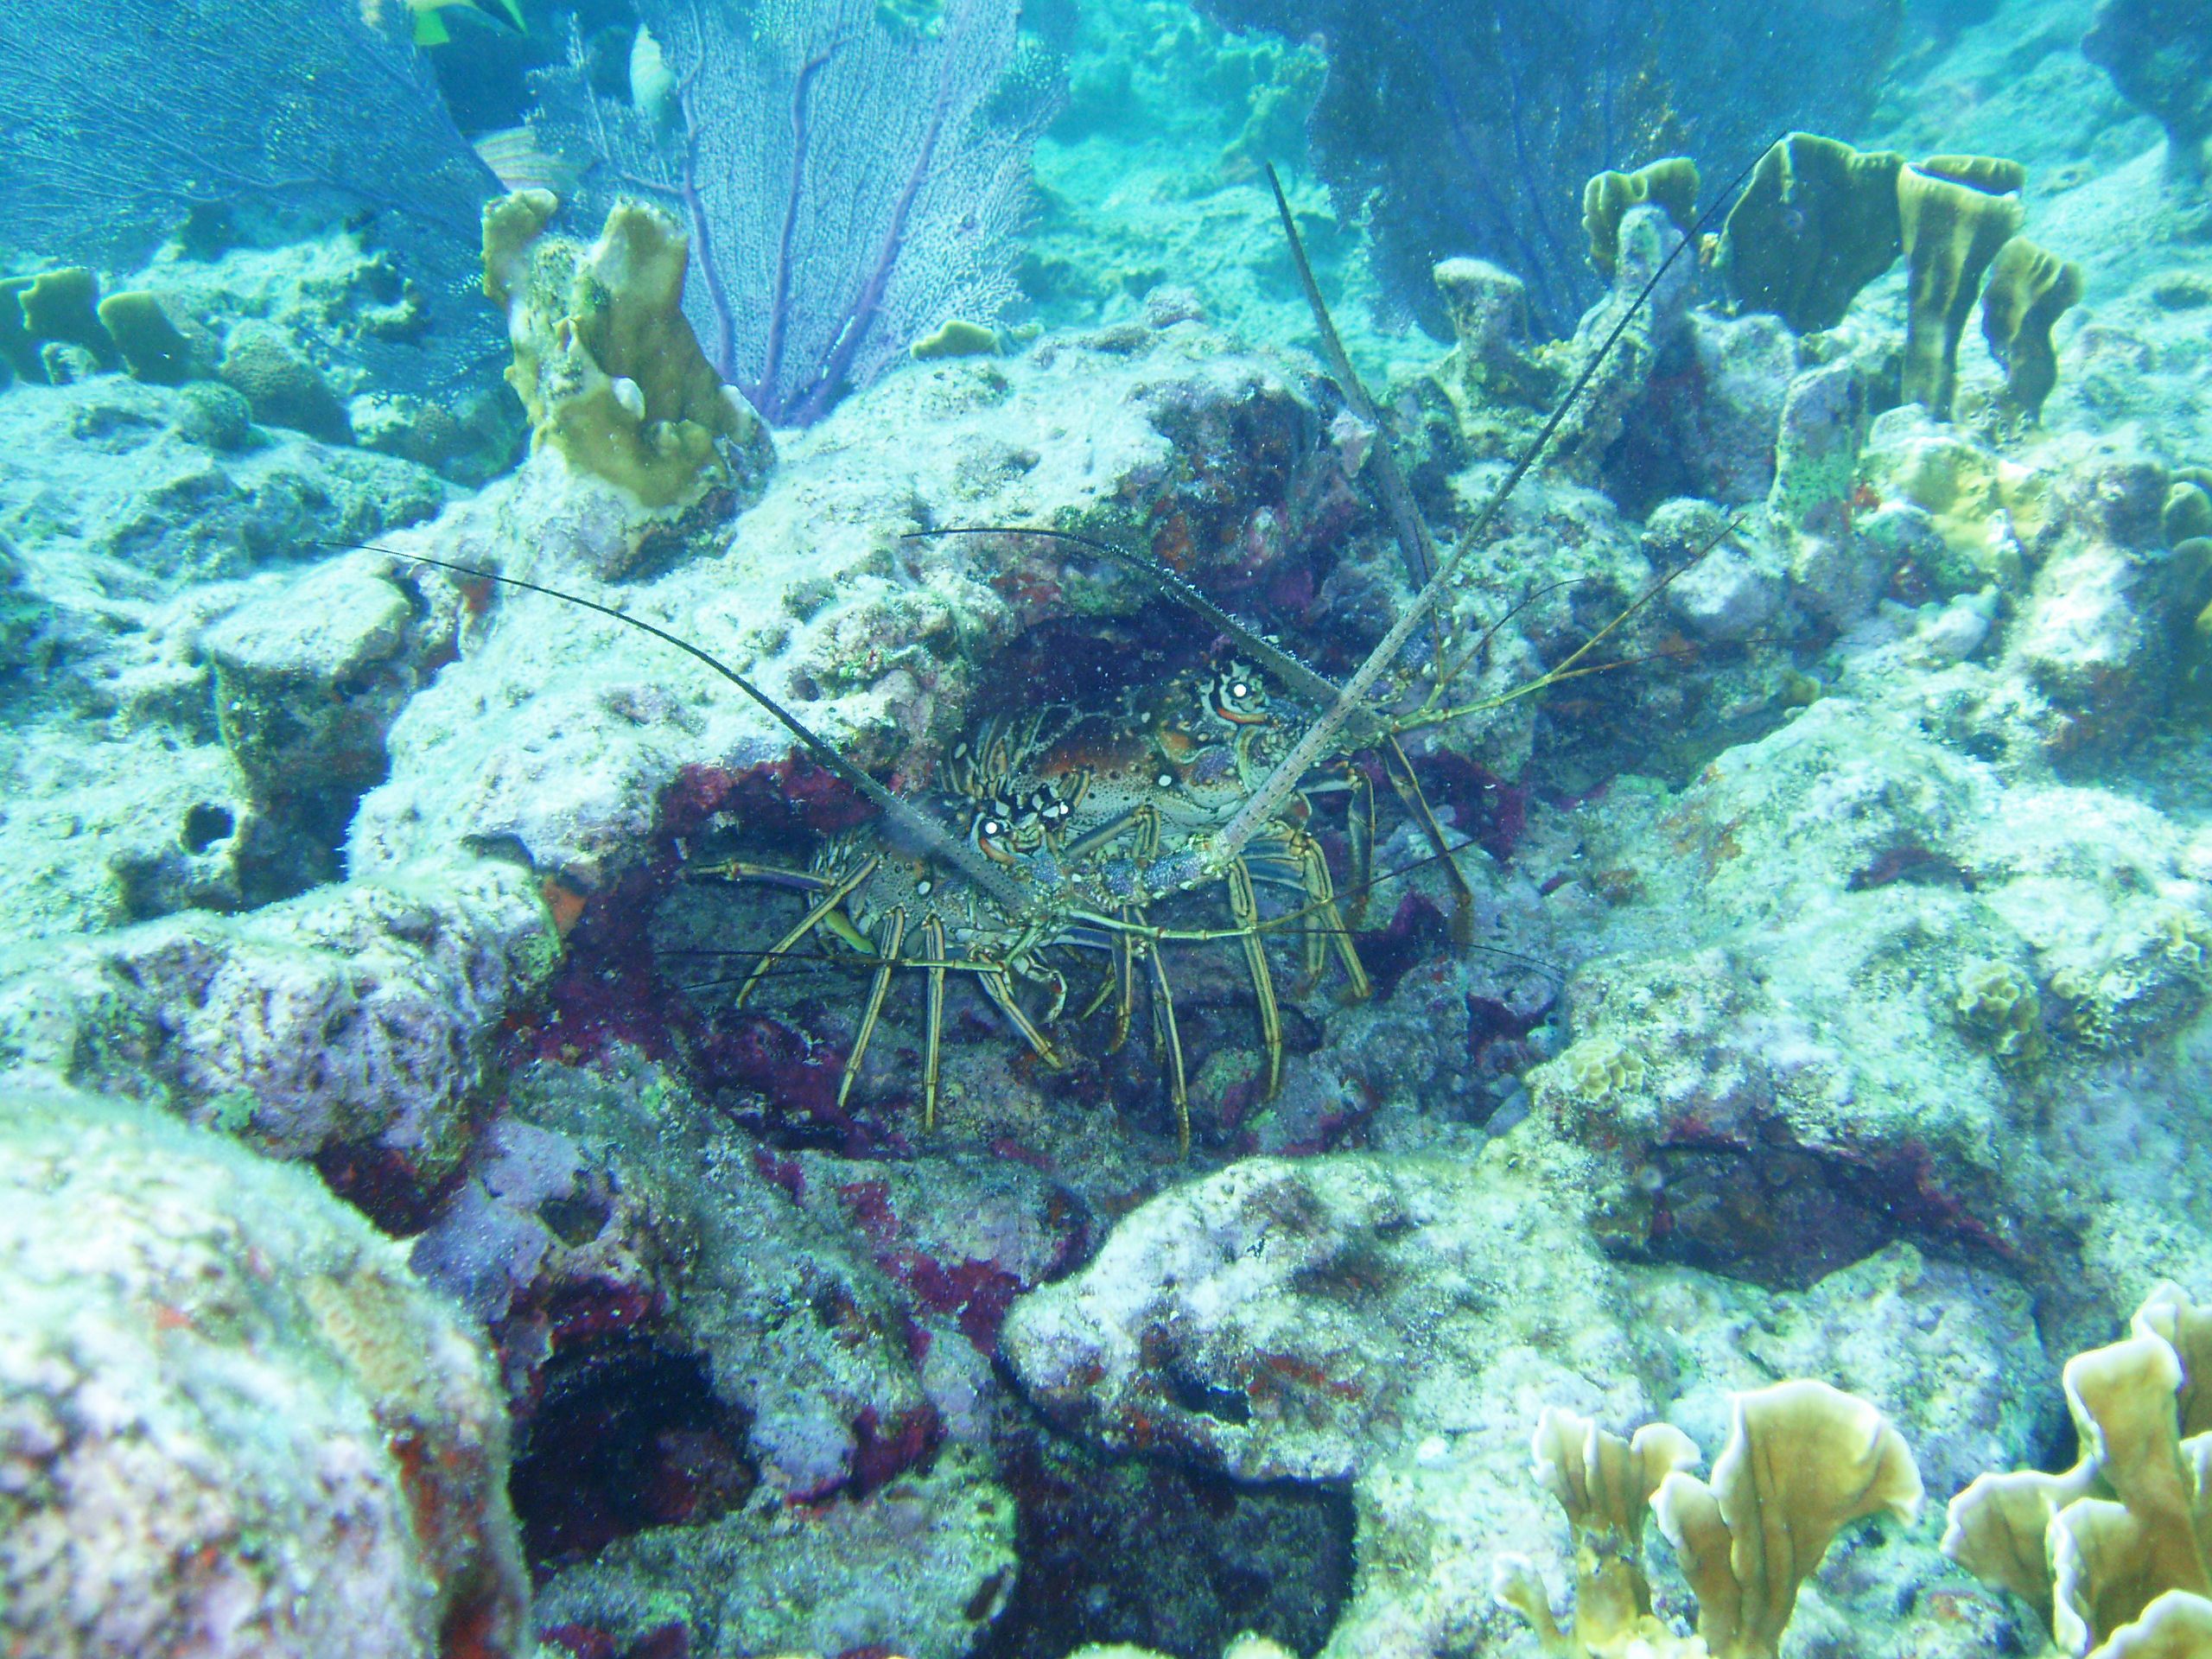 Lobsters at Snapper Ledge